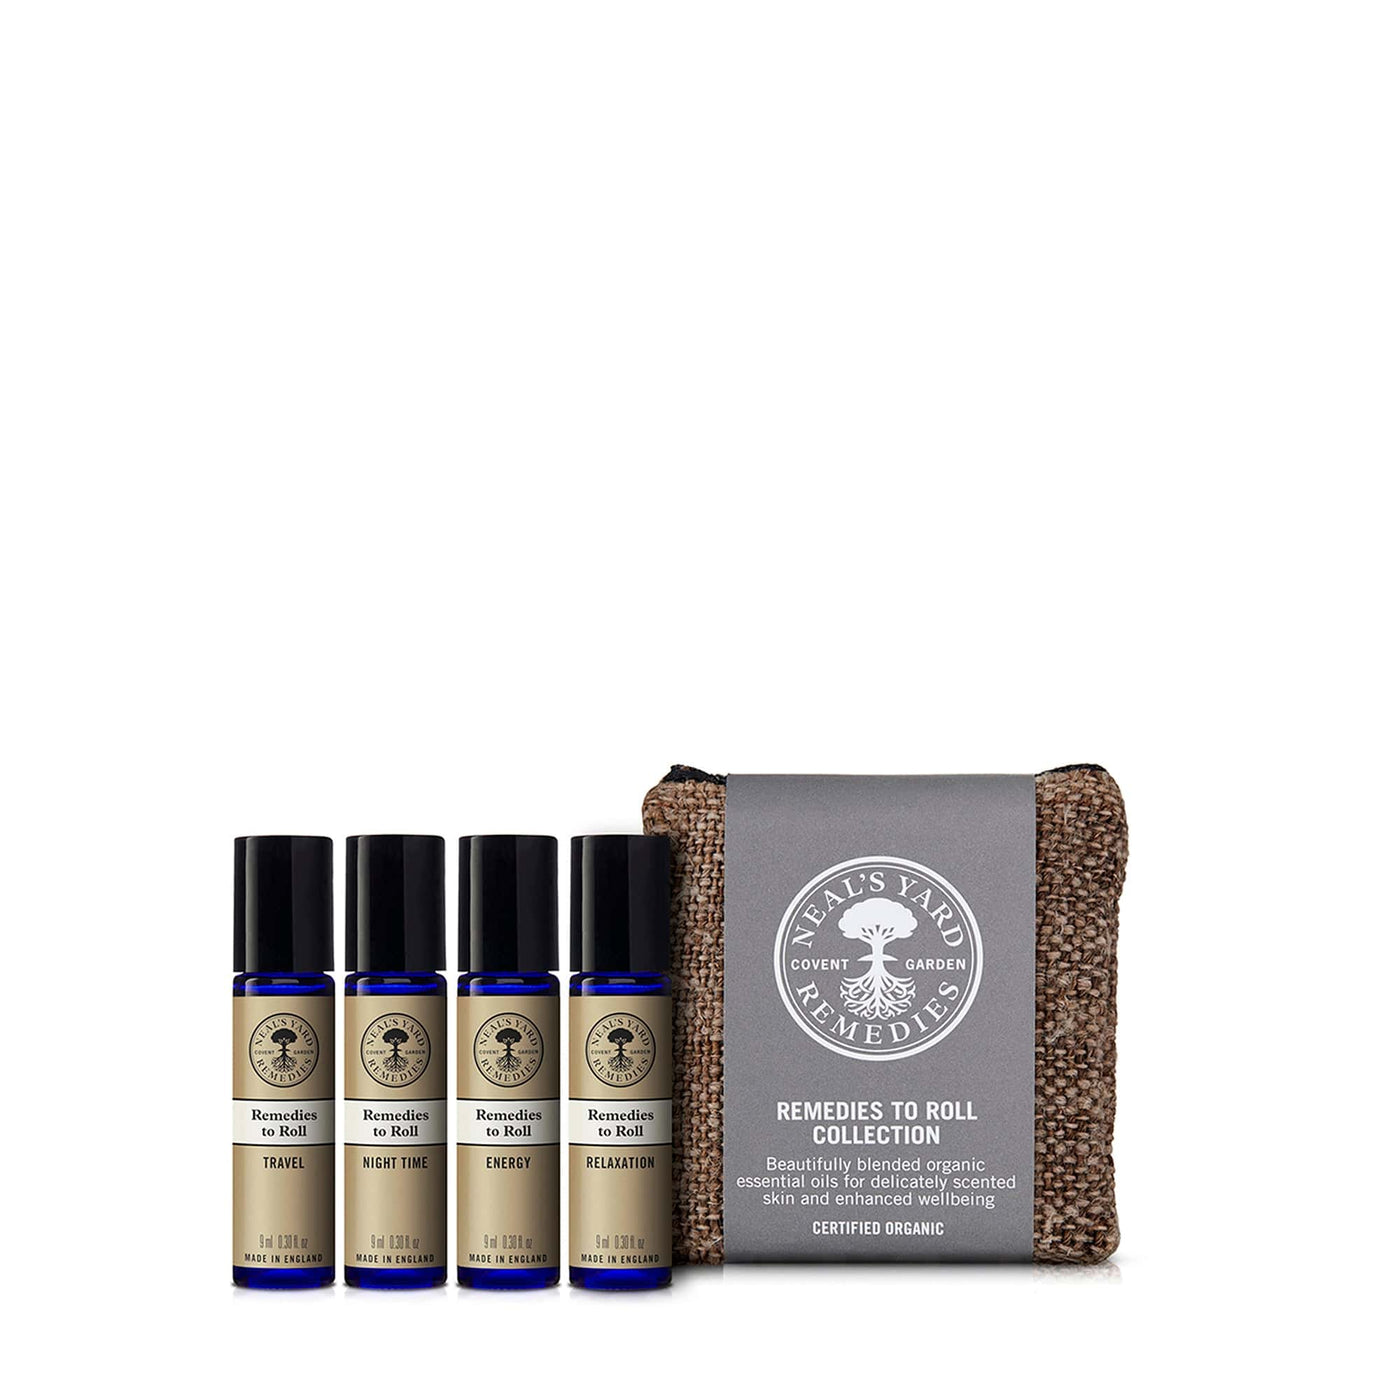 Neal's Yard Remedies Gifts & Collections Remedies to Roll Collection